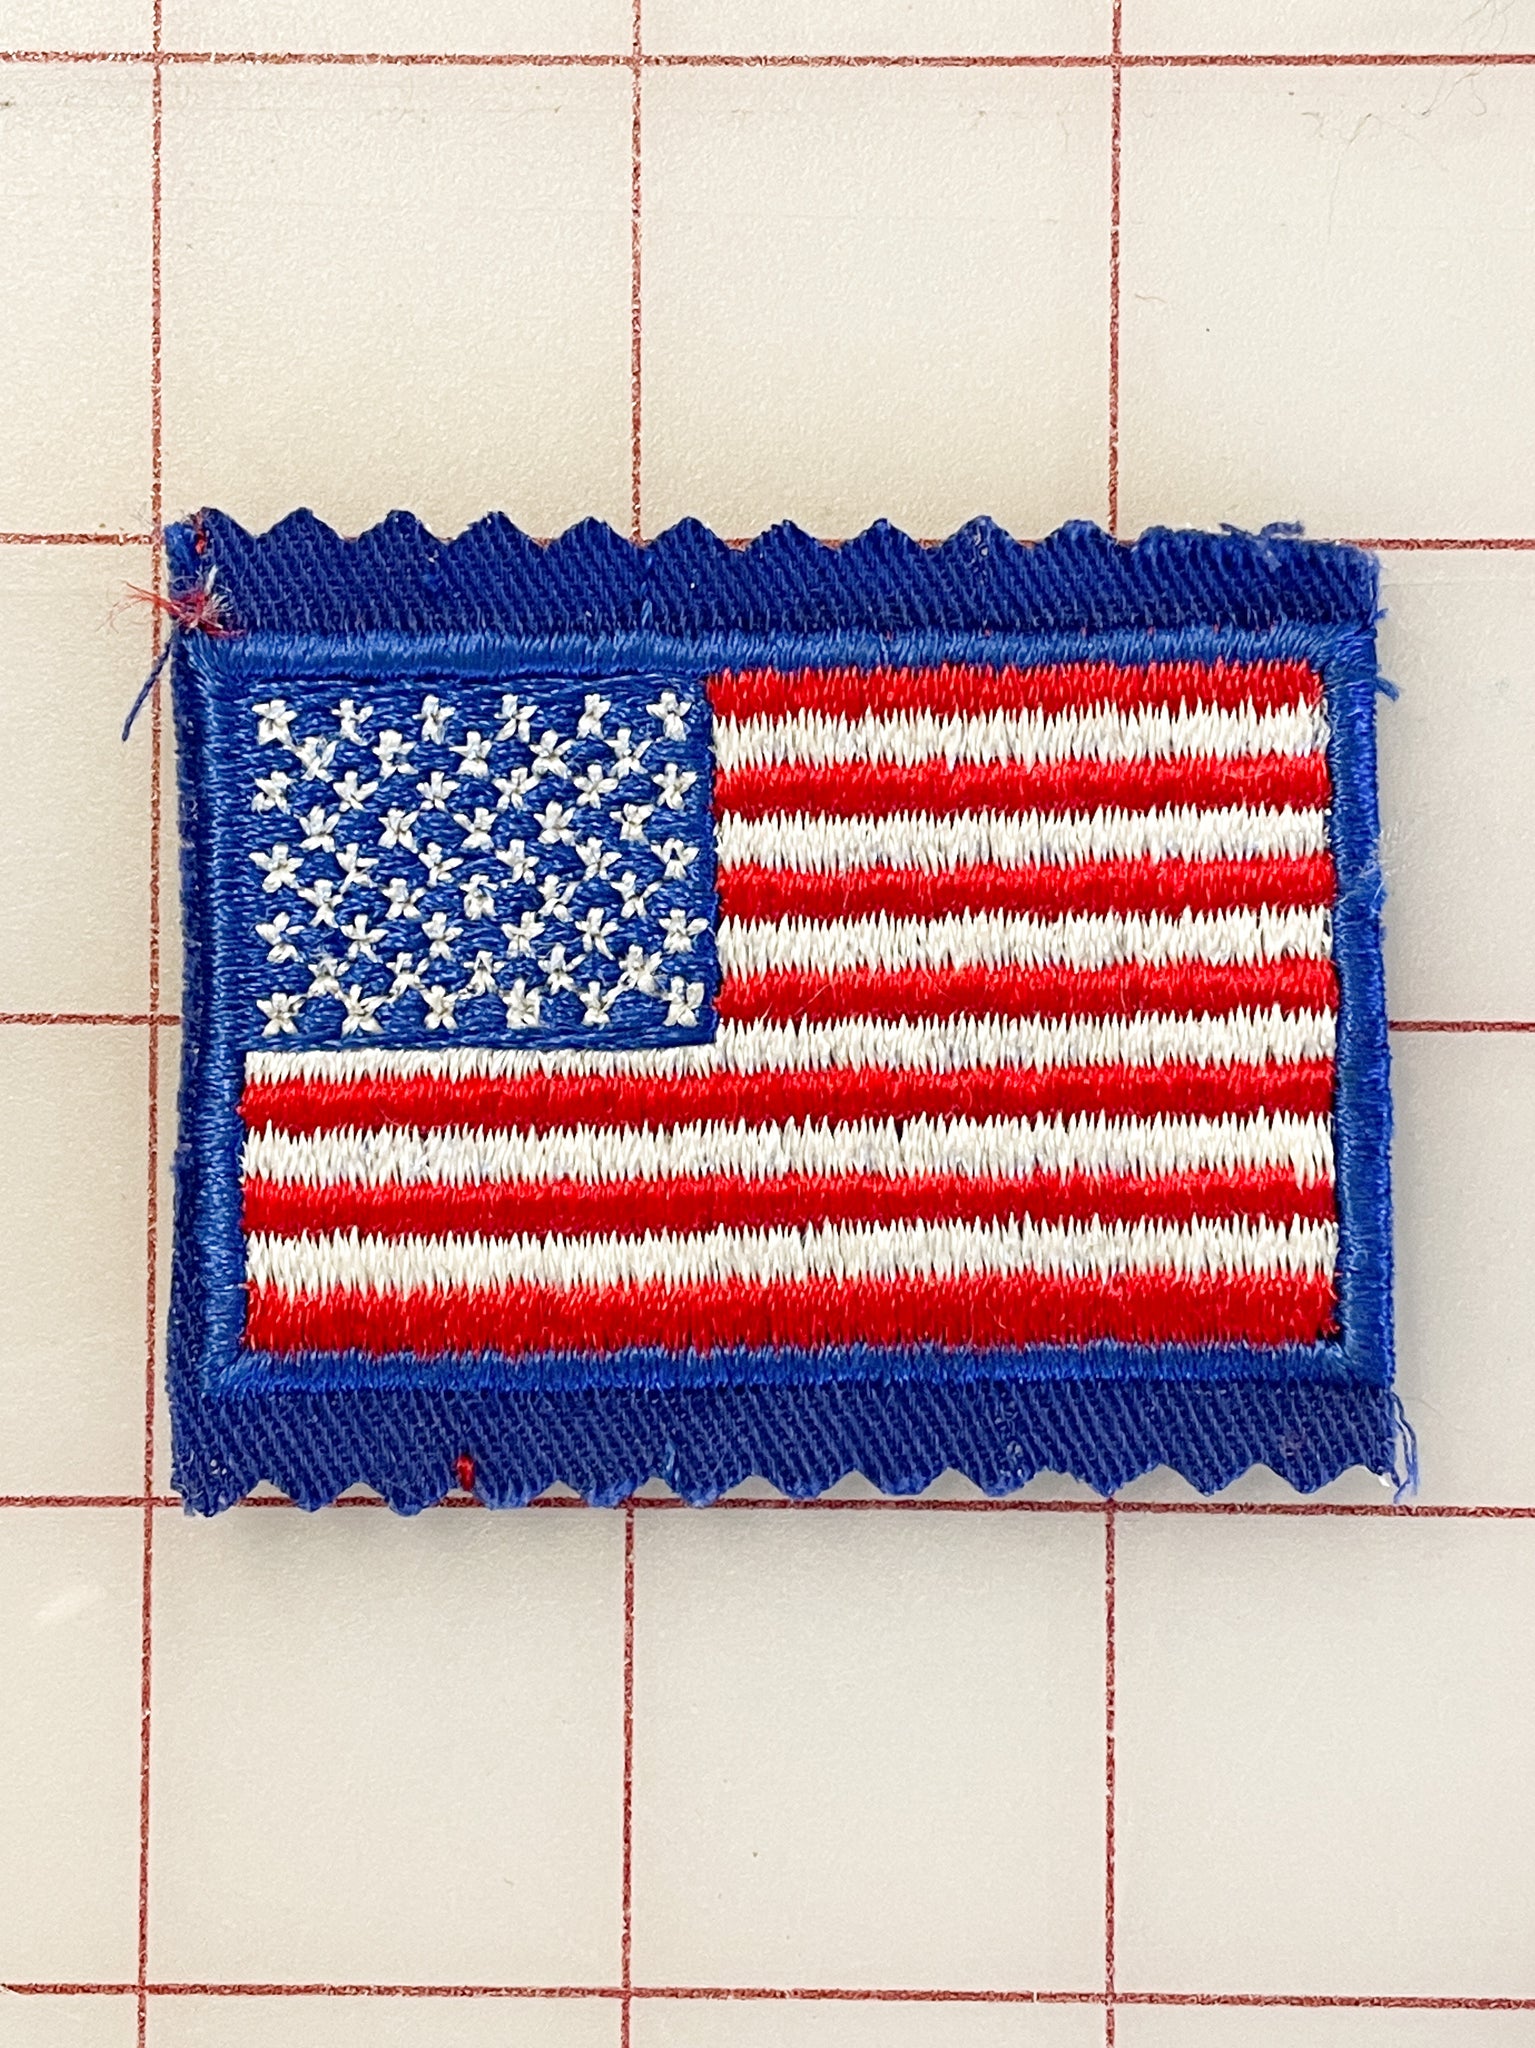 SALE Patch Embroidered - U.S.A. Flag